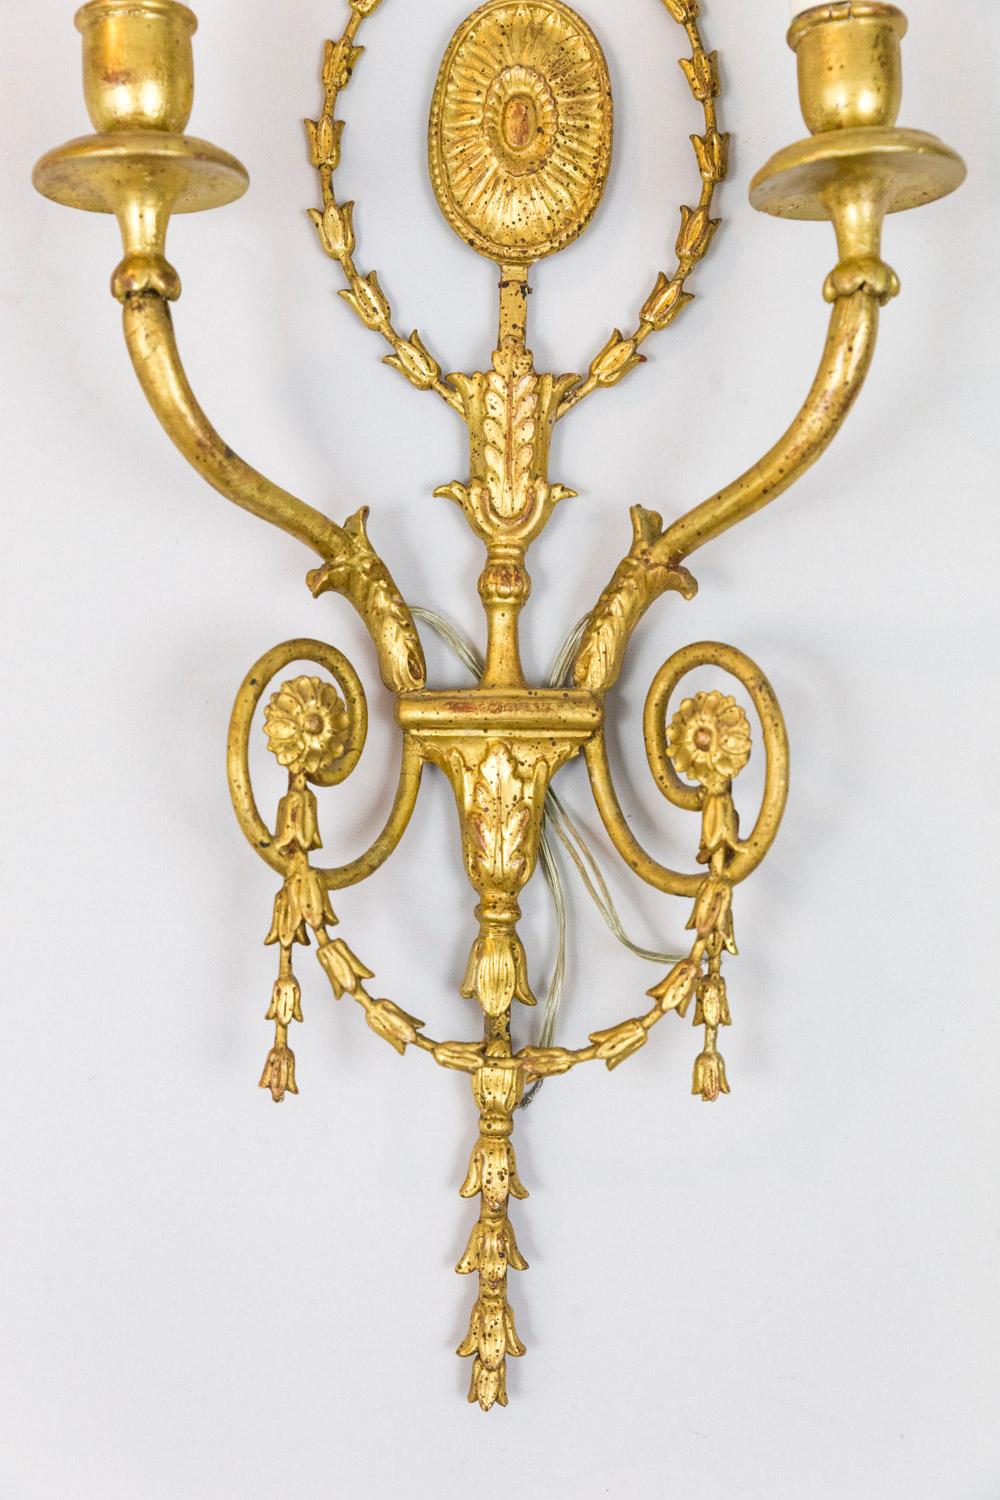 Pair of Adam Style Wall Sconces in Gilt Stucco and Metal, 1950s For Sale 2